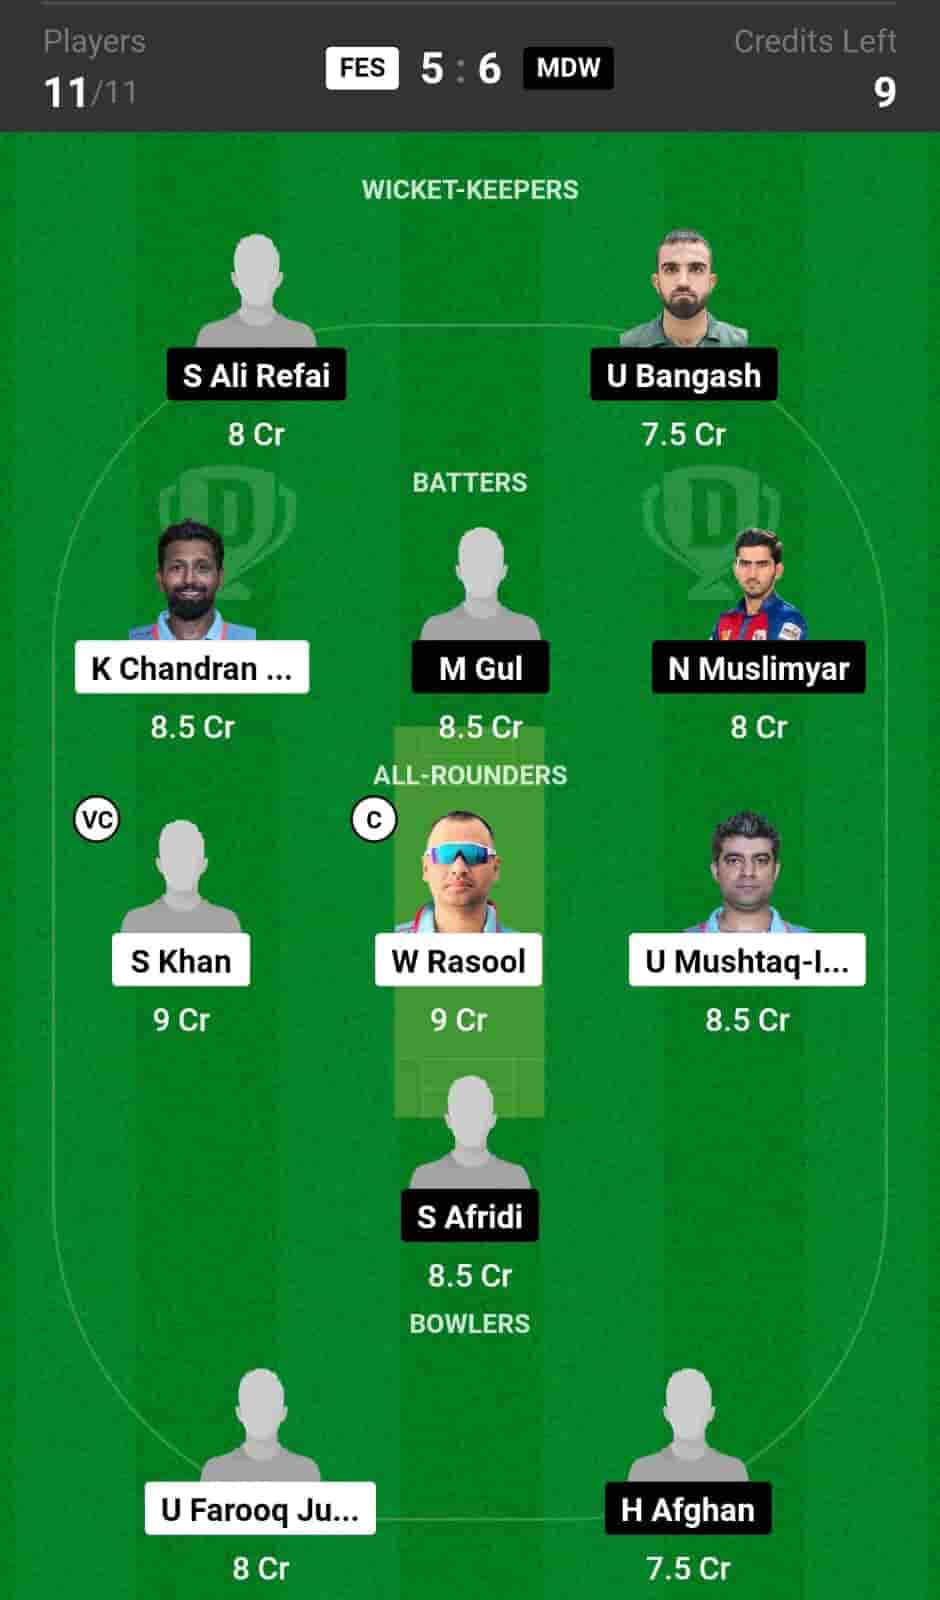 FES vs MDW Dream11 Prediction -  S Khan and W Rasool Will be good option for C & Vc in Your Dream11 Fantasy Team